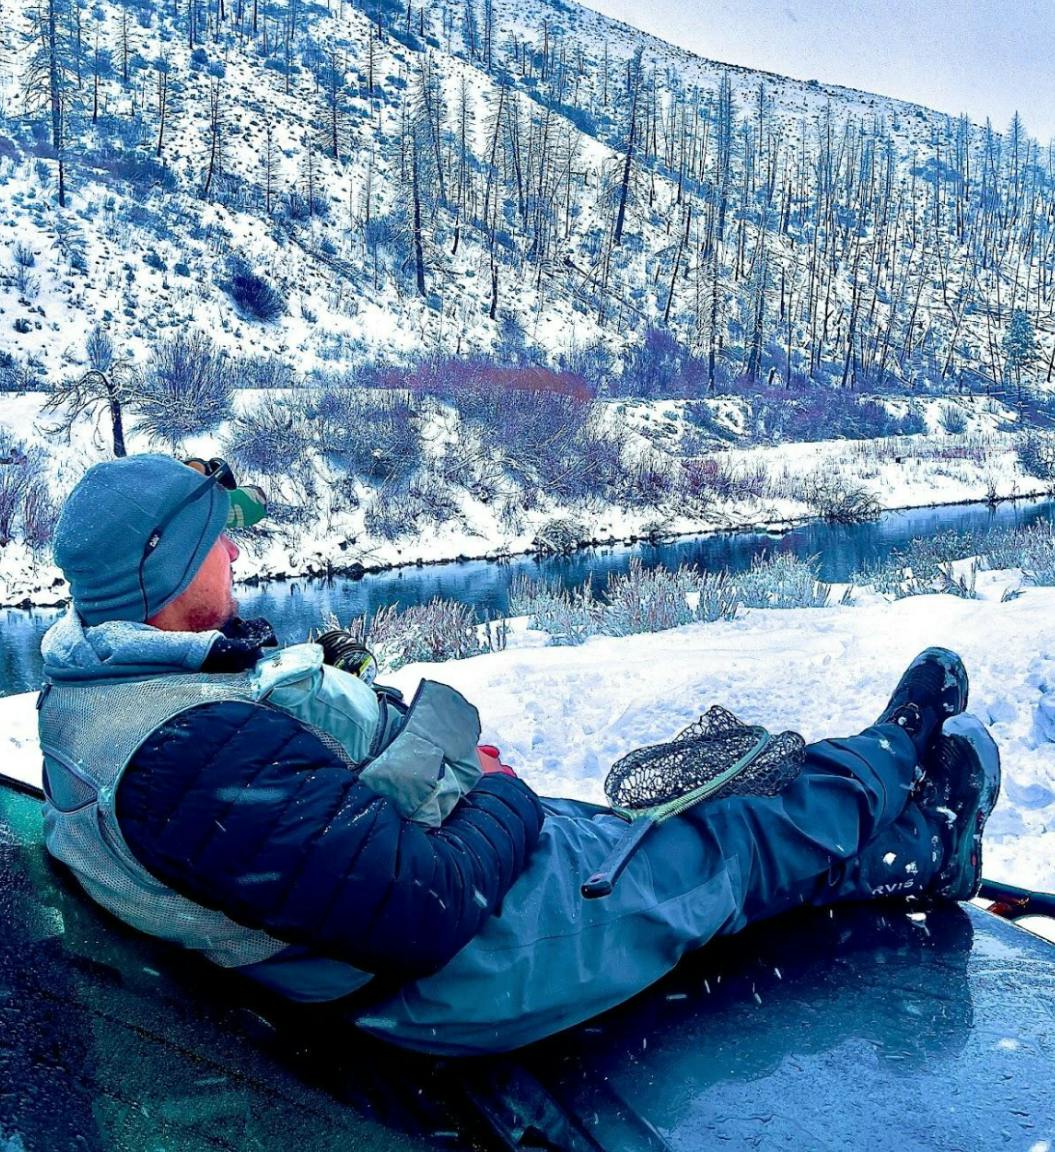 A fisherman sitting on his car while looking out at a snowy river.